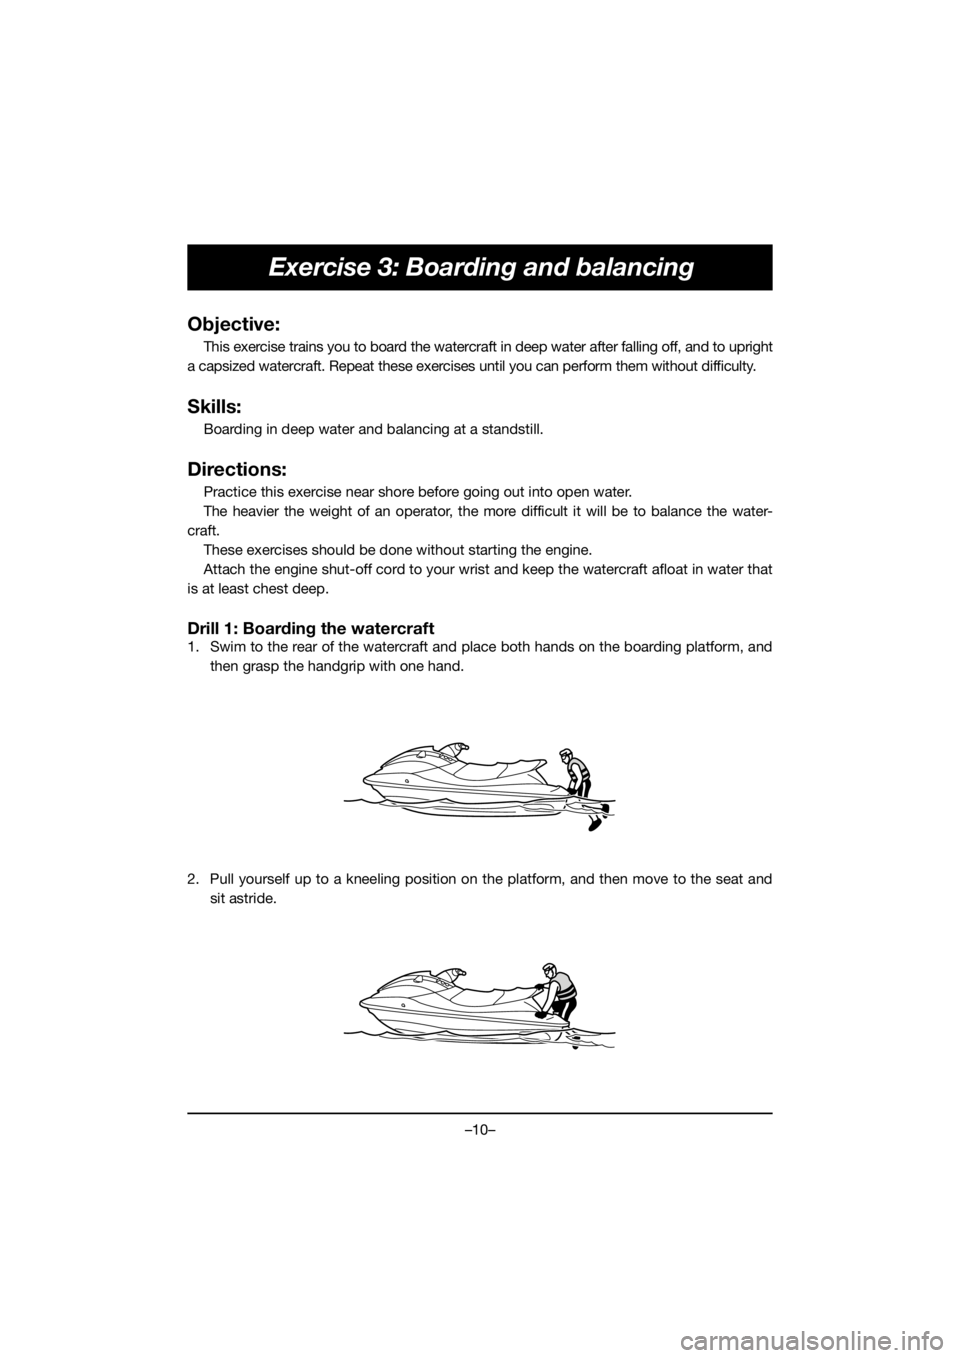 YAMAHA EX SPORT 2019  Manuale de Empleo (in Spanish) –10–
Exercise 3: Boarding and balancing
Objective:
This exercise trains you to board the watercraft in deep water after falling off, and to upright
a capsized watercraft. Repeat these exercises un